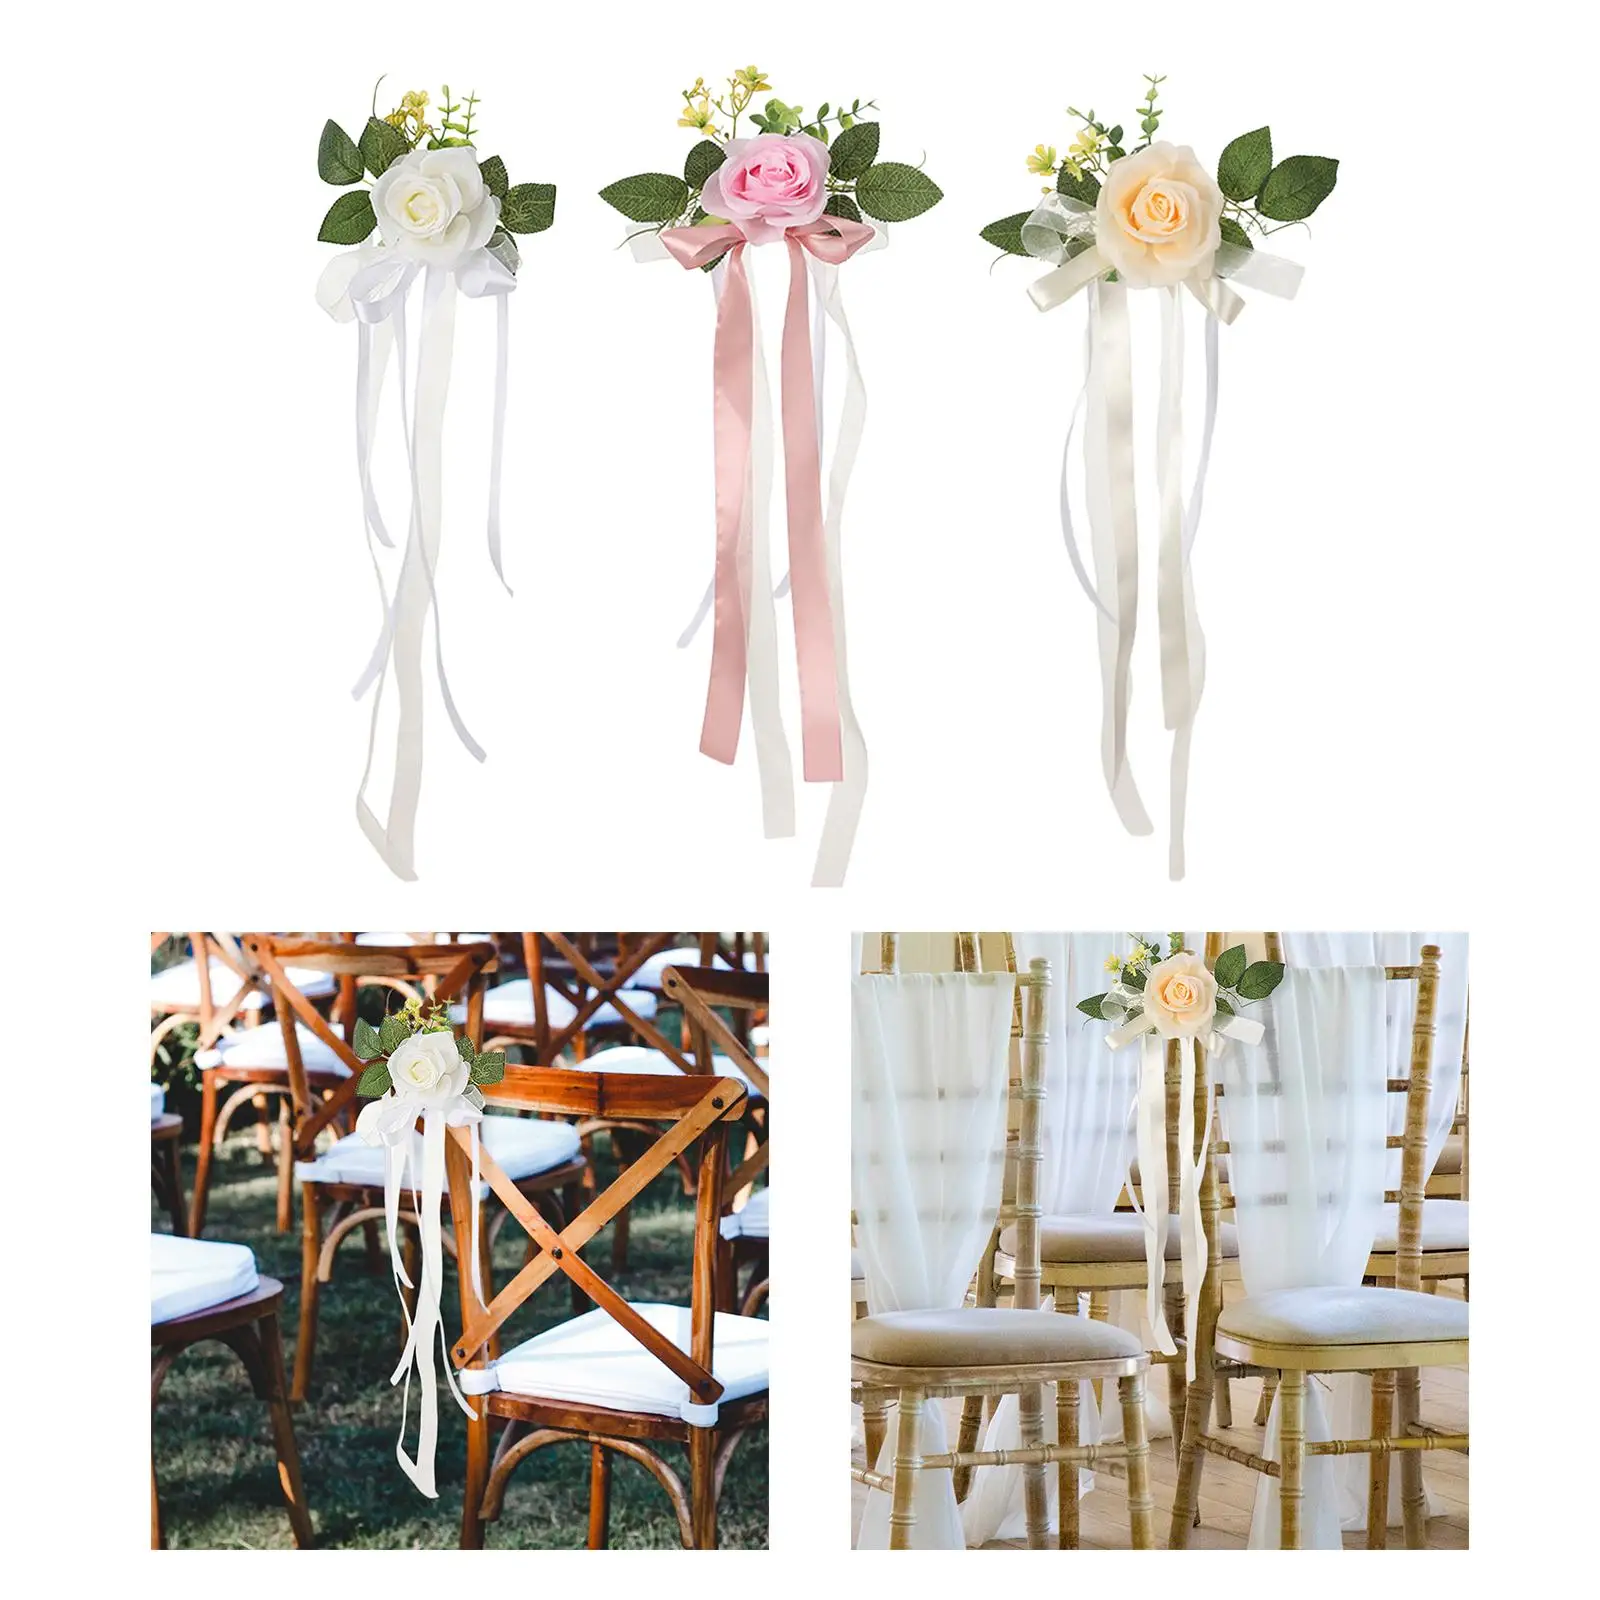 PEW Flowers for Chair Artificial Flowers Wedding Ceremony Aisle Decorations for Ceremony Party Wedding Engagement Birthday